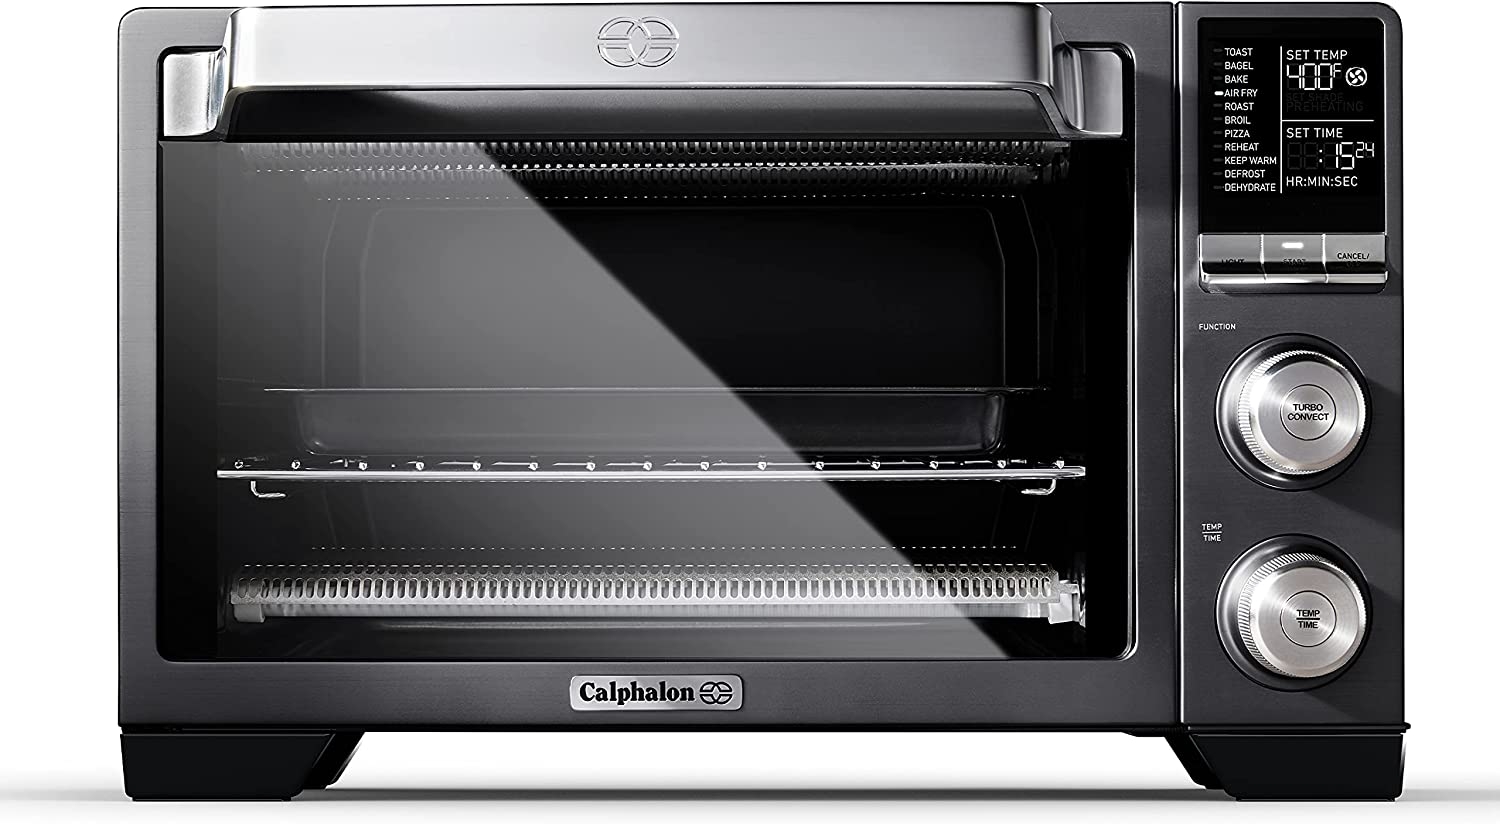 Calphalon Quartz Heat Countertop Toaster Oven, Stainless Steel, Extra-Large Capacity, Black, Dark Gray Import To Shop ×Product